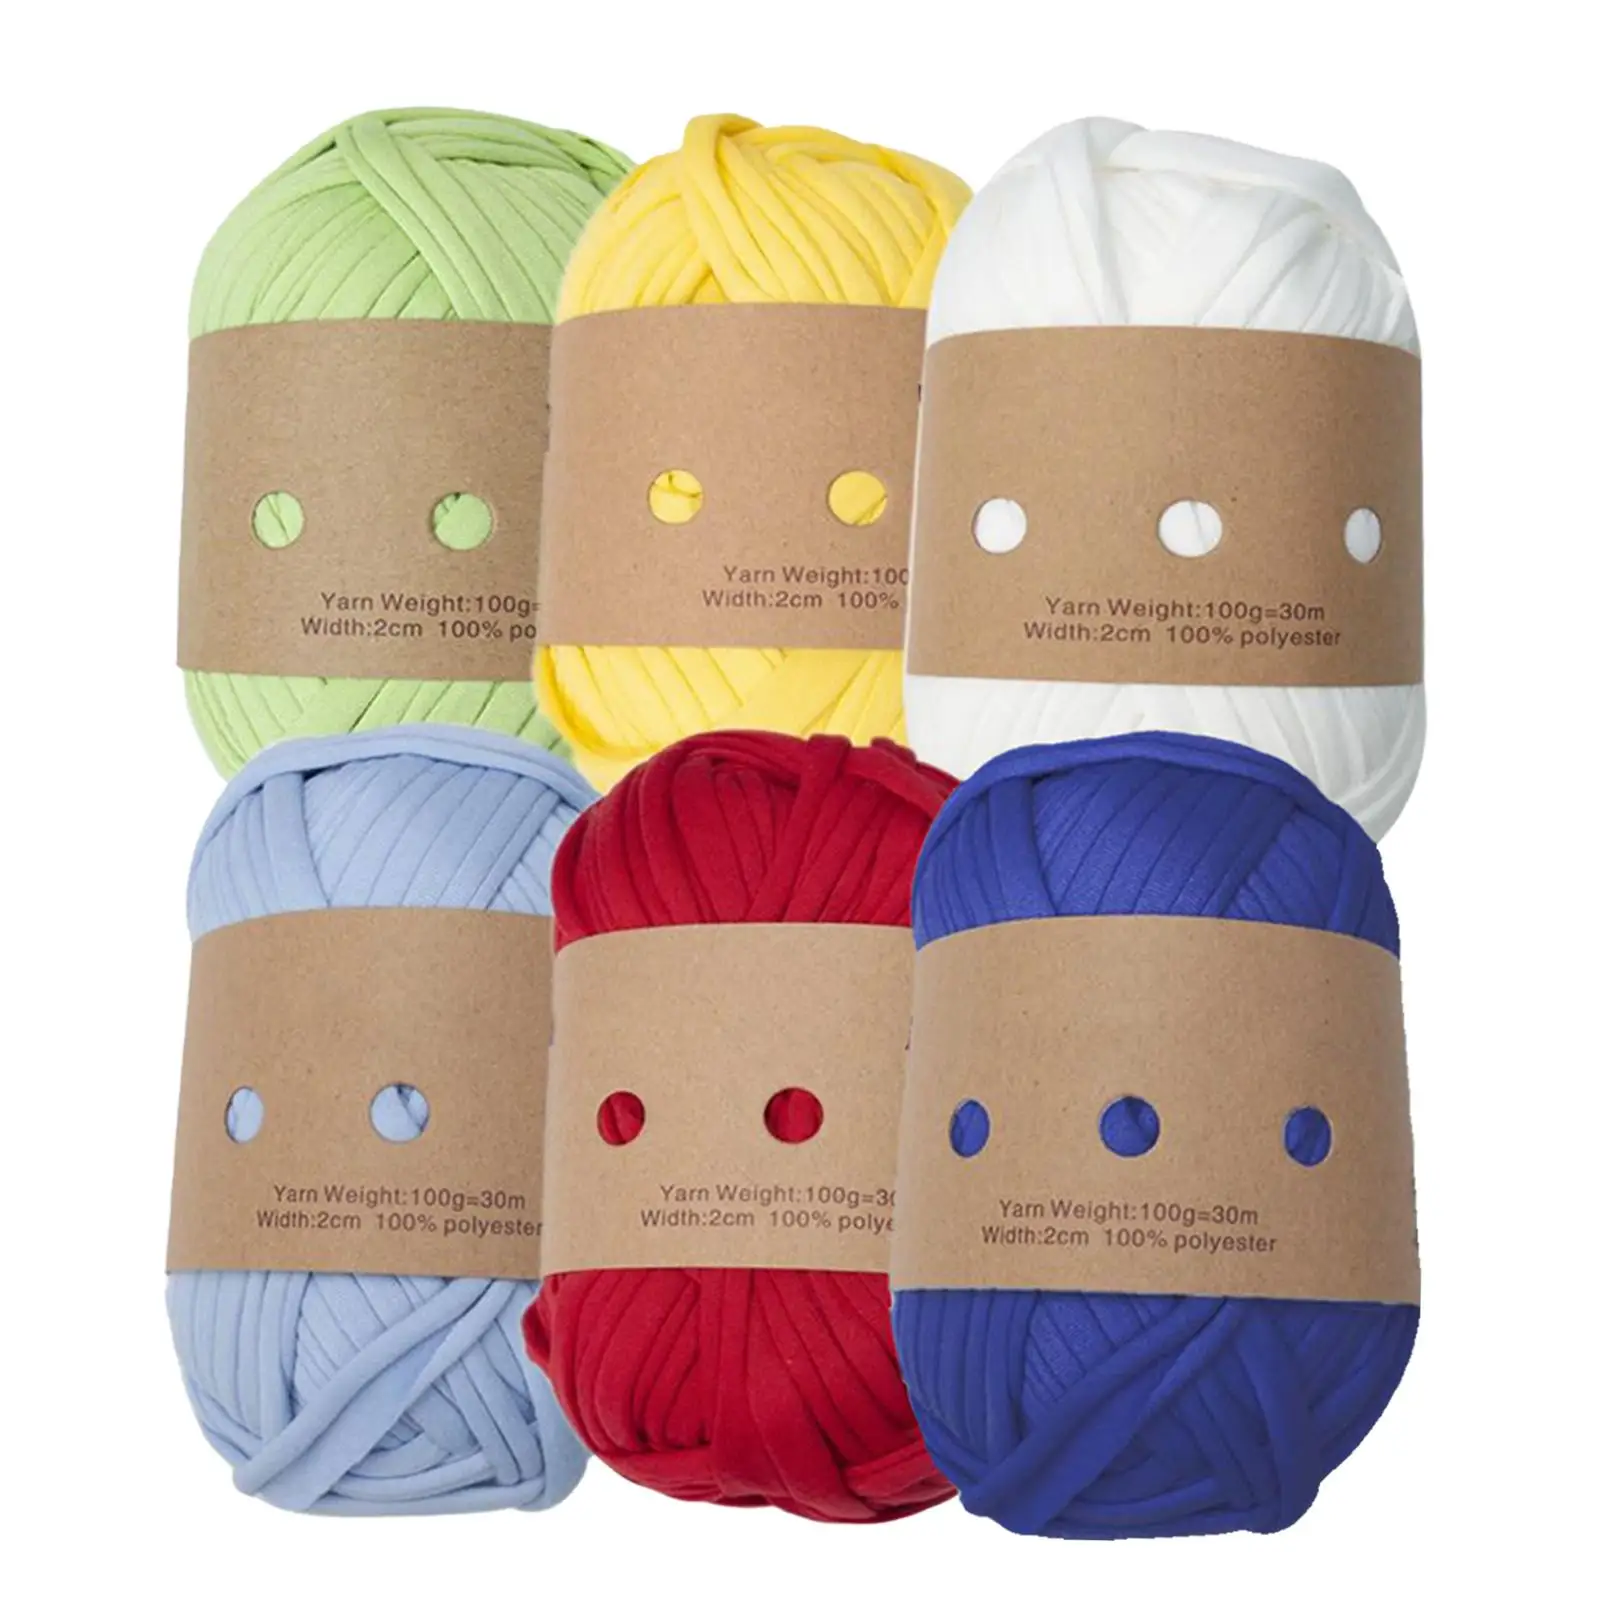 6 Pieces Knitting Yarn Crochet Bag Making Material Package Bags Chunky Yarn